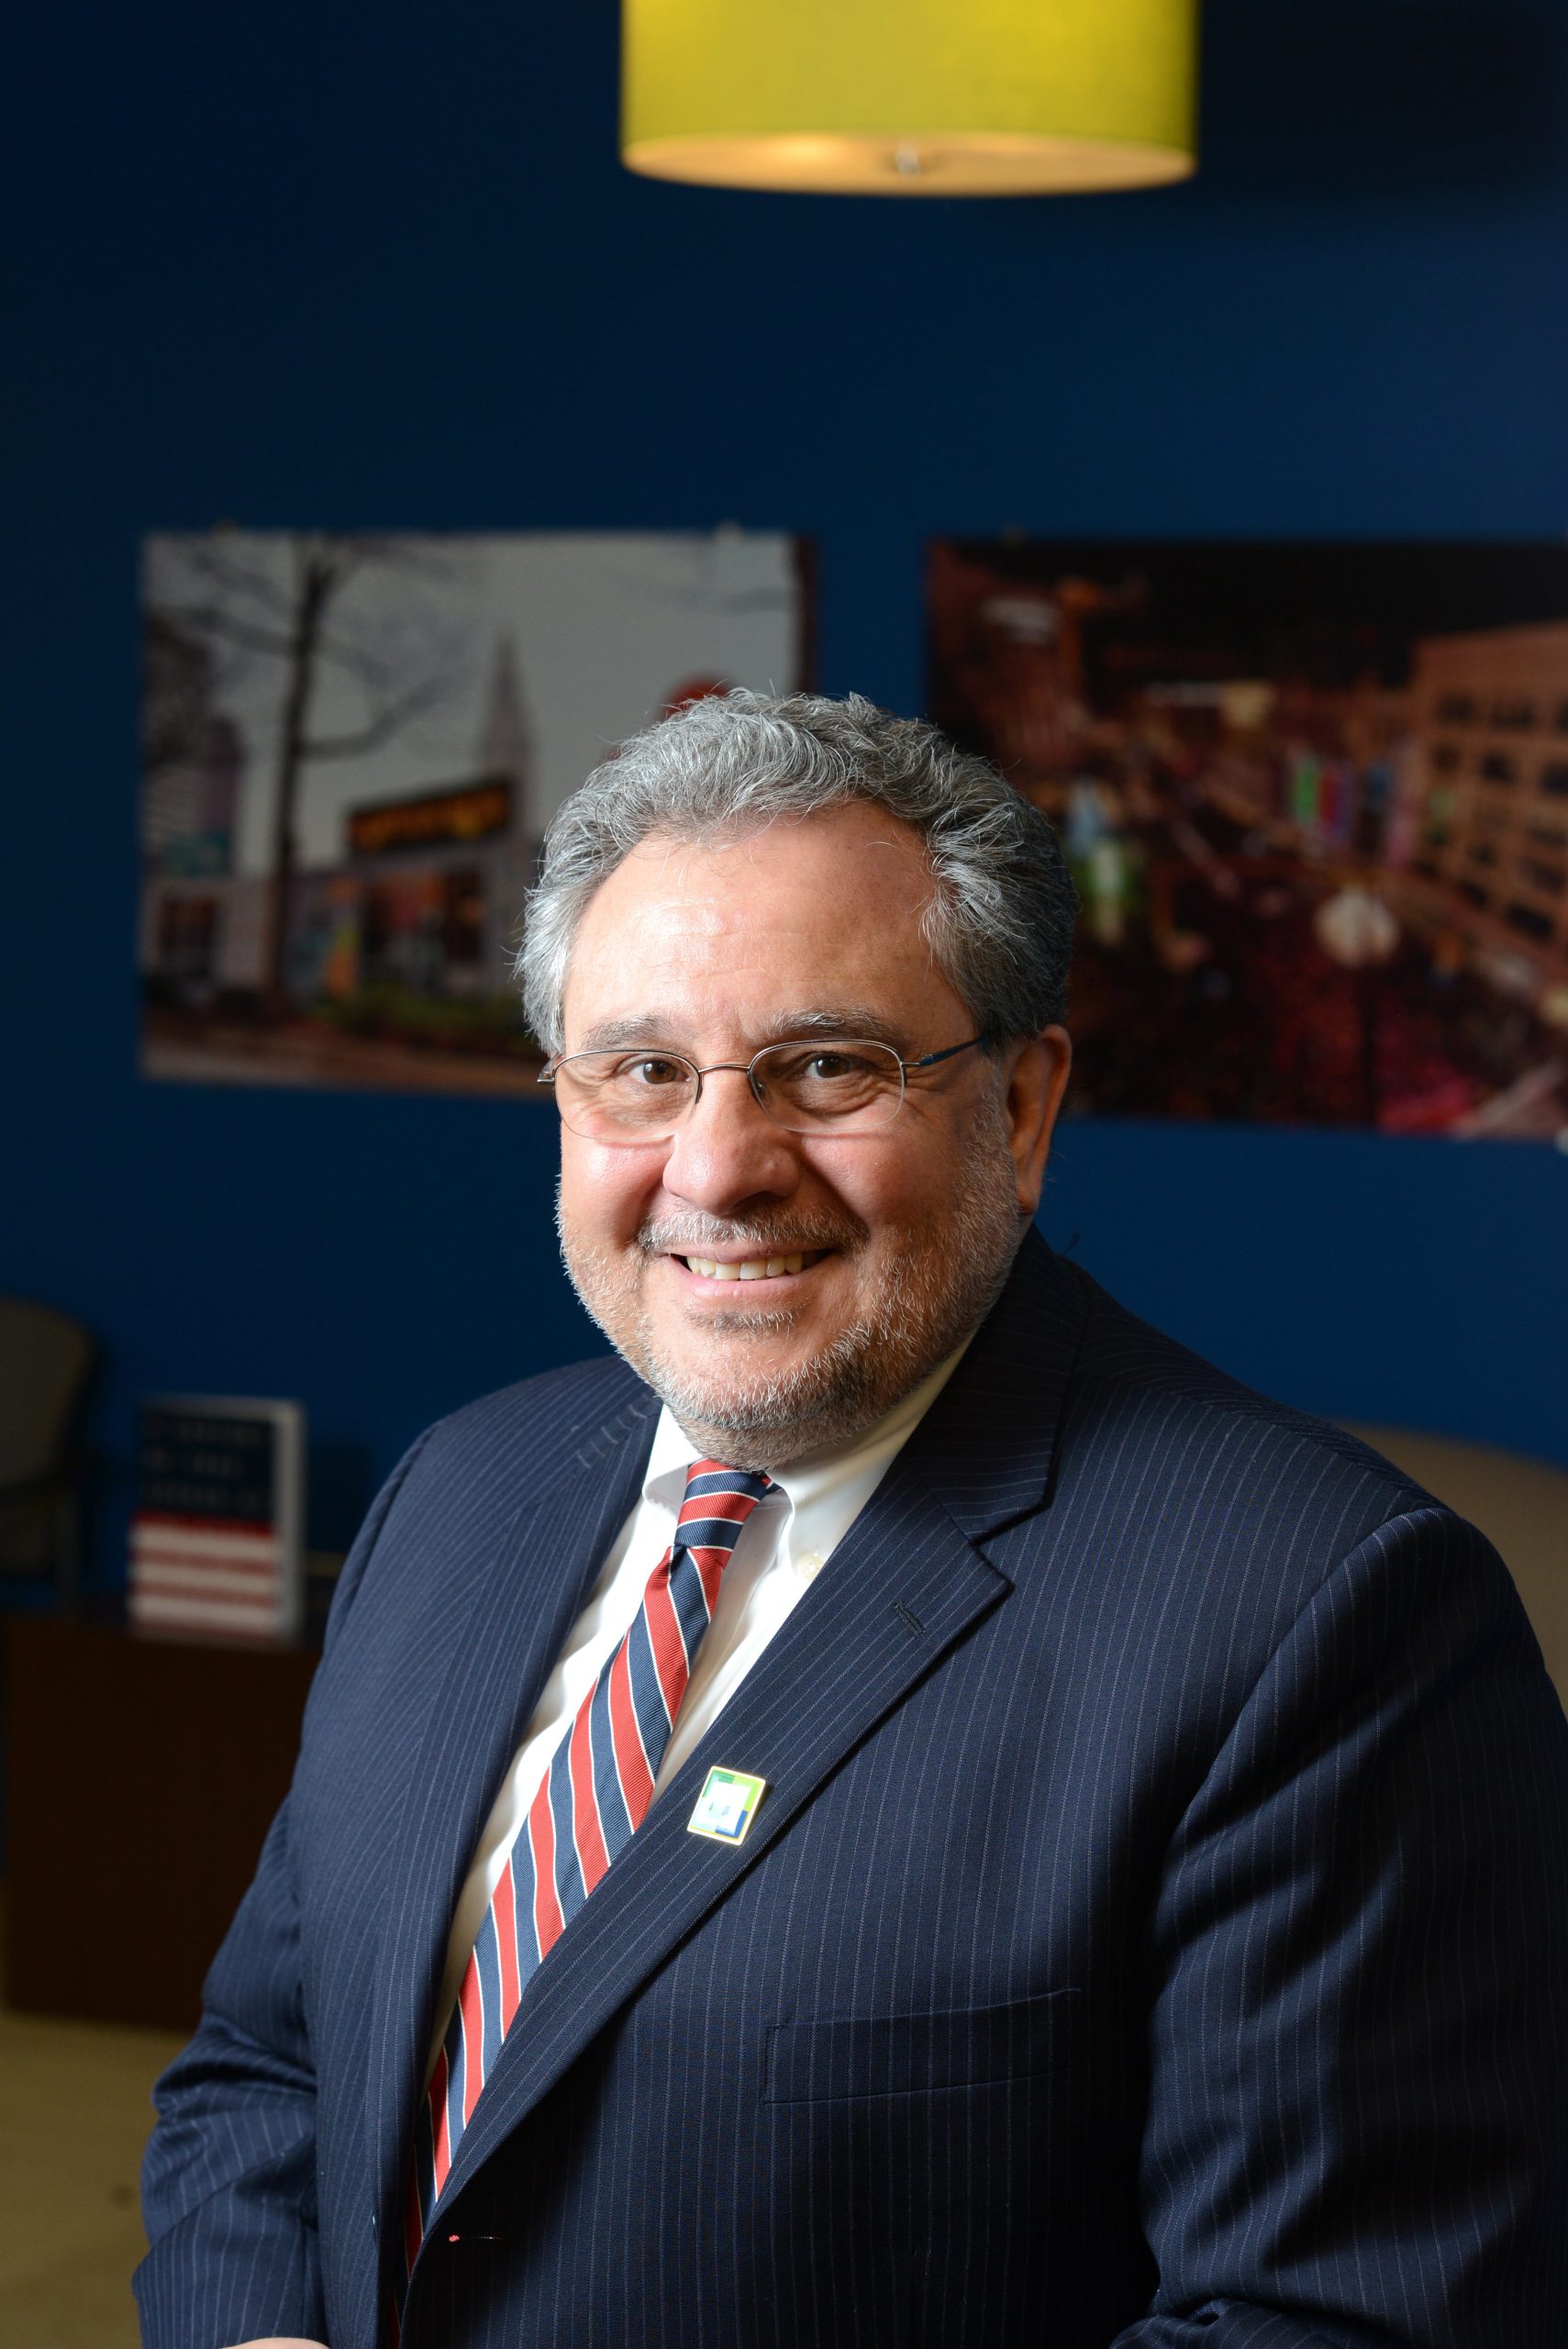 CEO Joe Marinucci on Creating the Downtown Cleveland Alliance